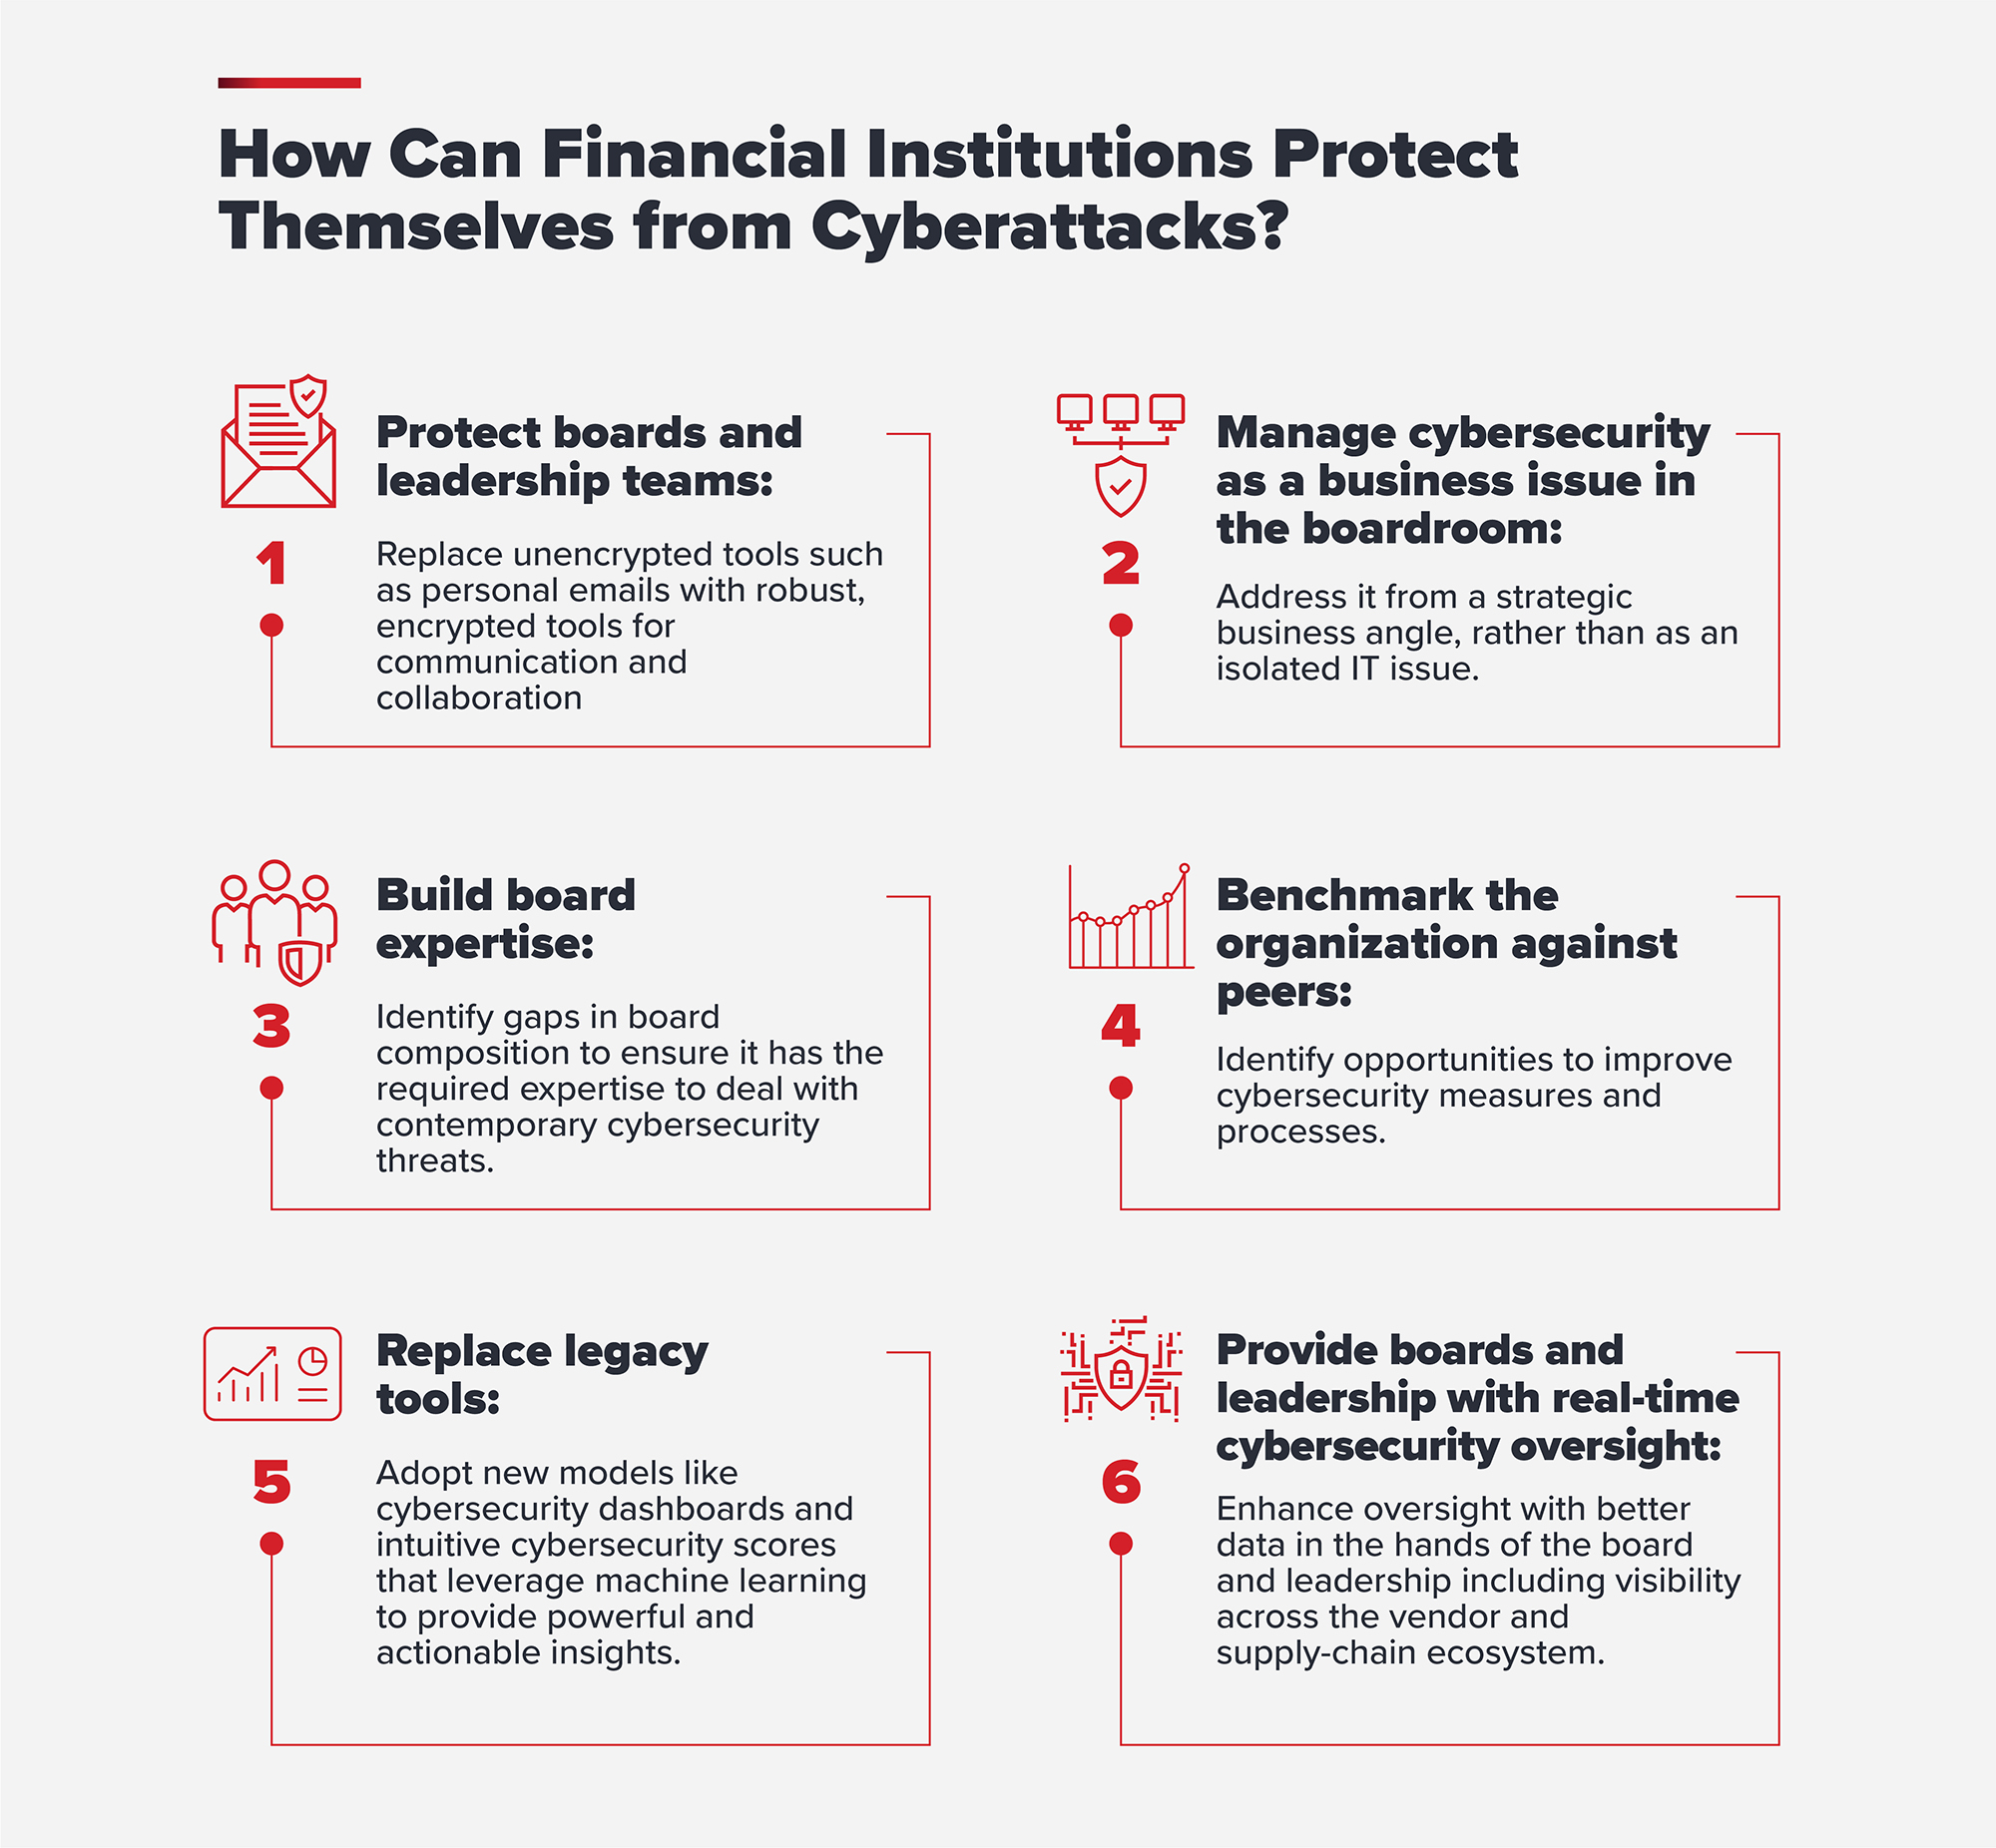 financial-institutions-protect-themselves-against-cyberattacks